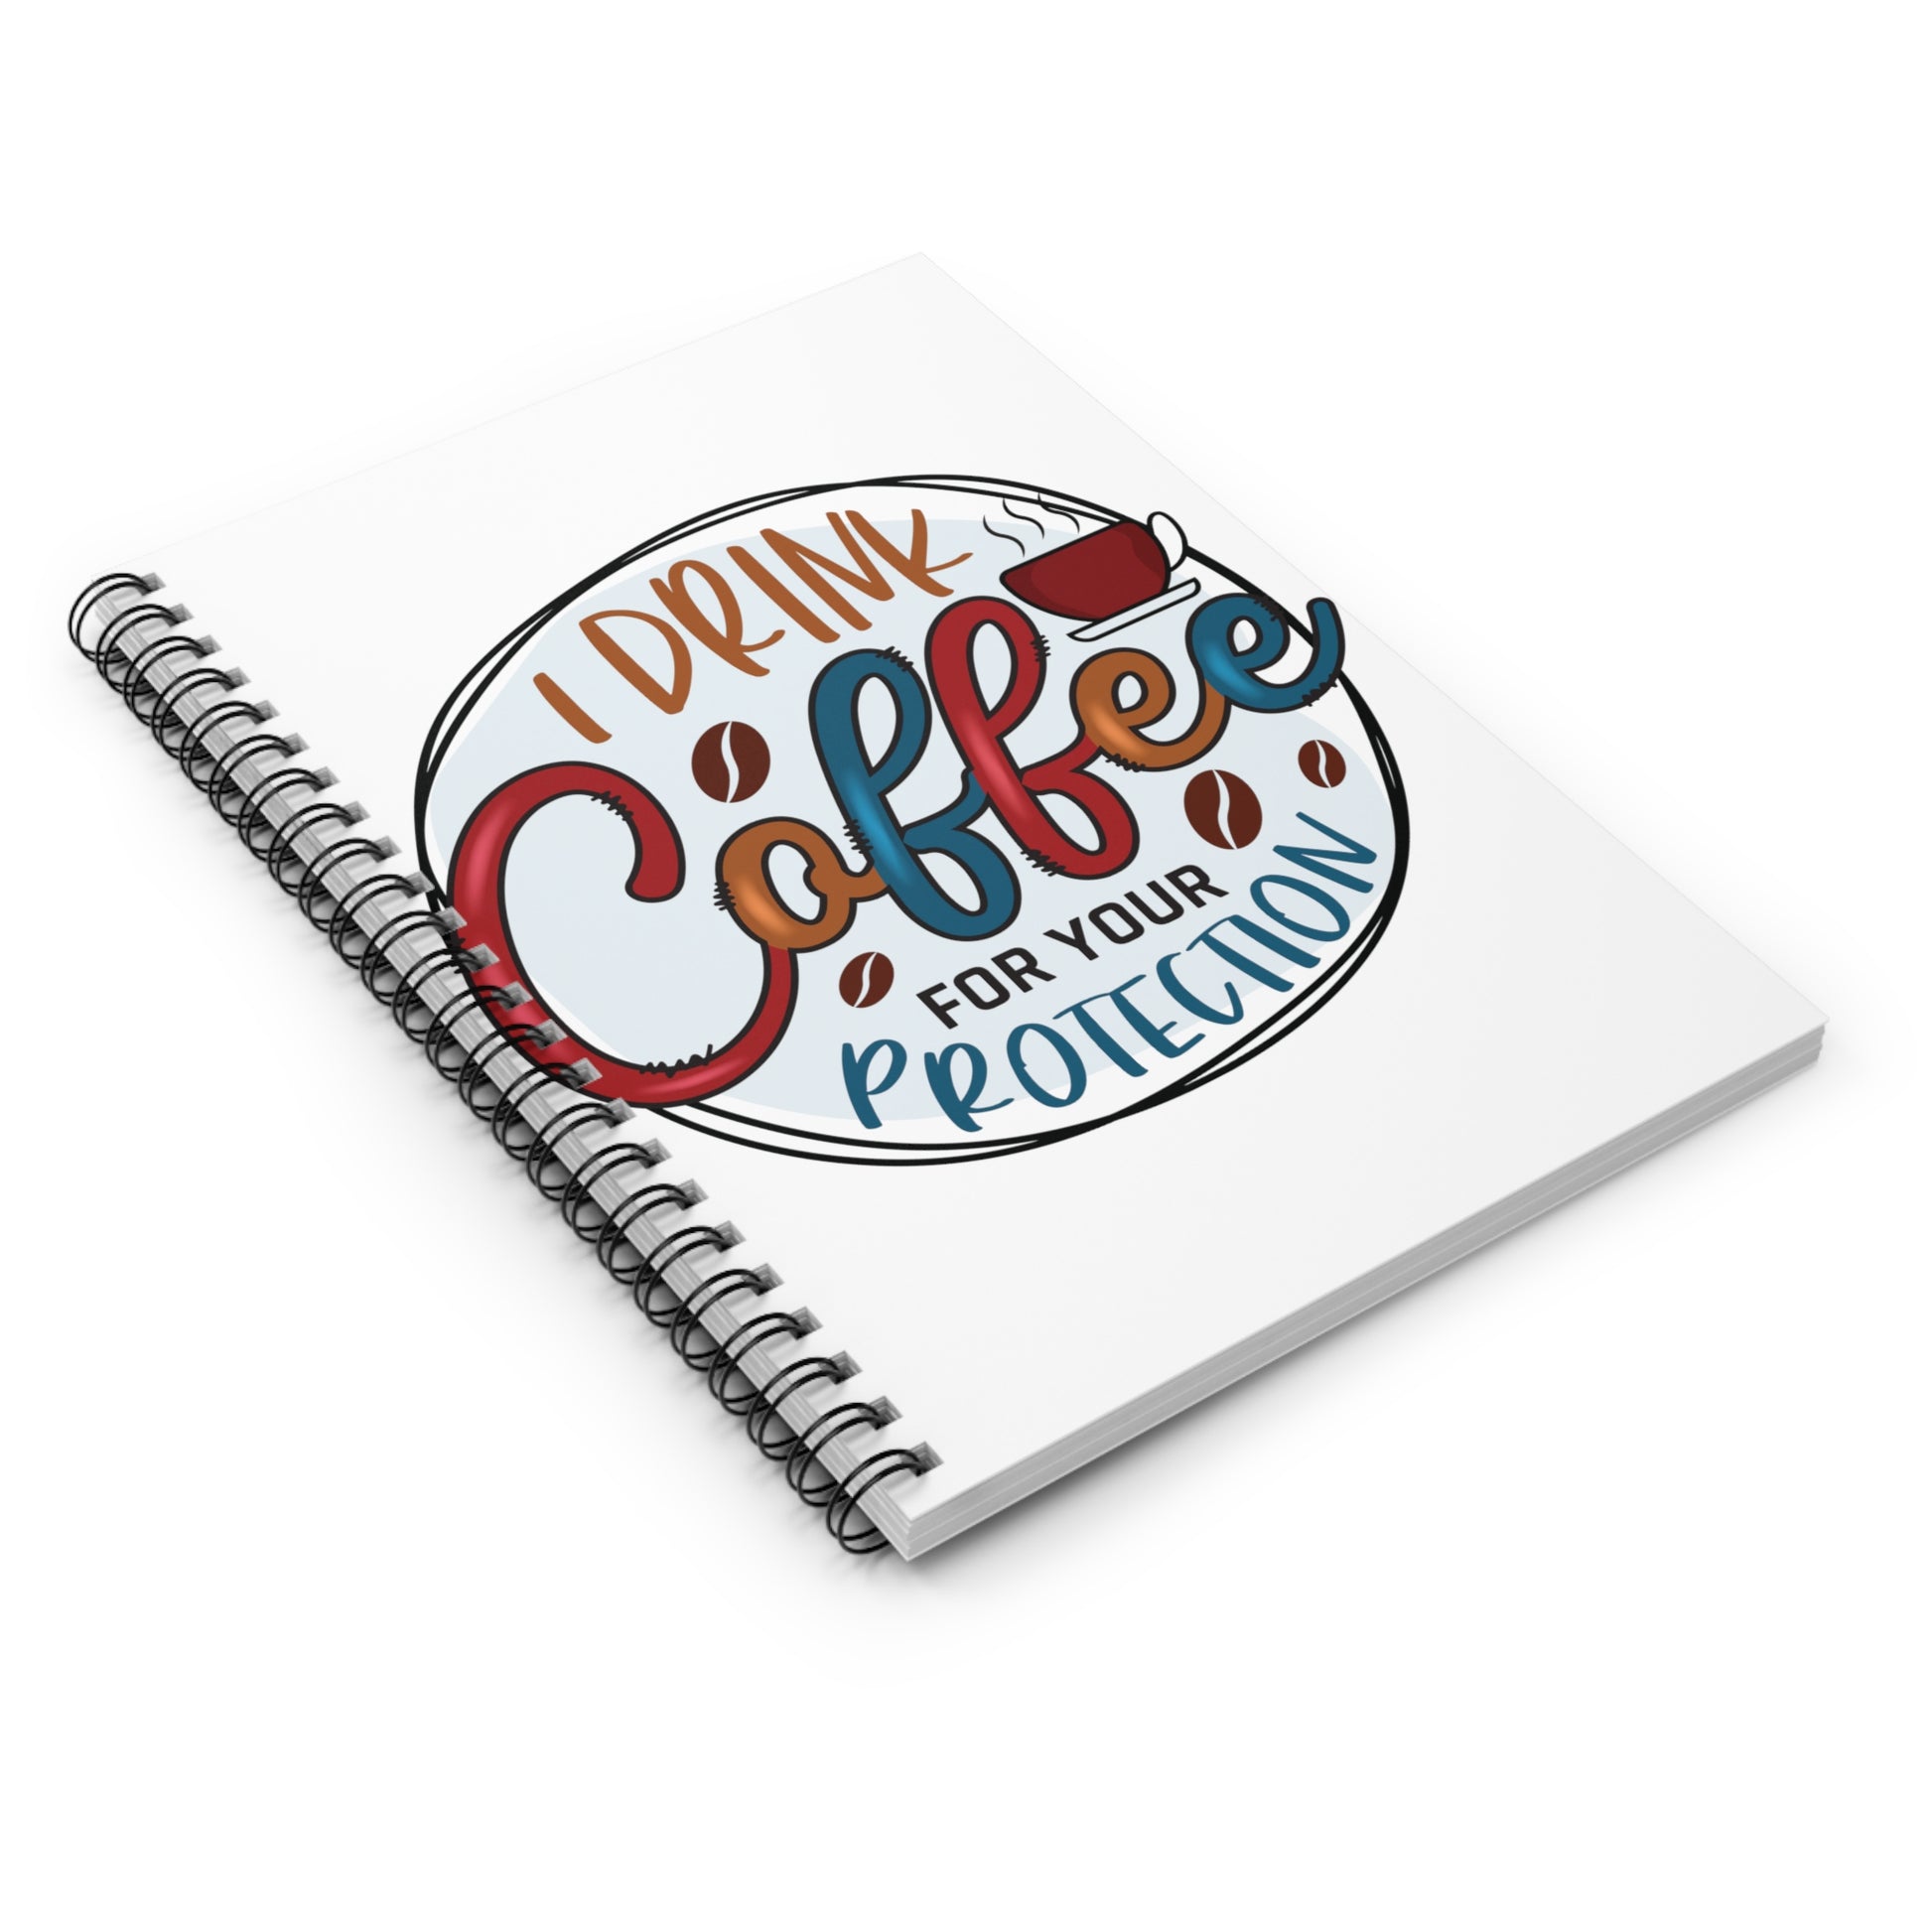 I Drink Coffee: Spiral Notebook - Log Books - Journals - Diaries - and More Custom Printed by TheGlassyLass